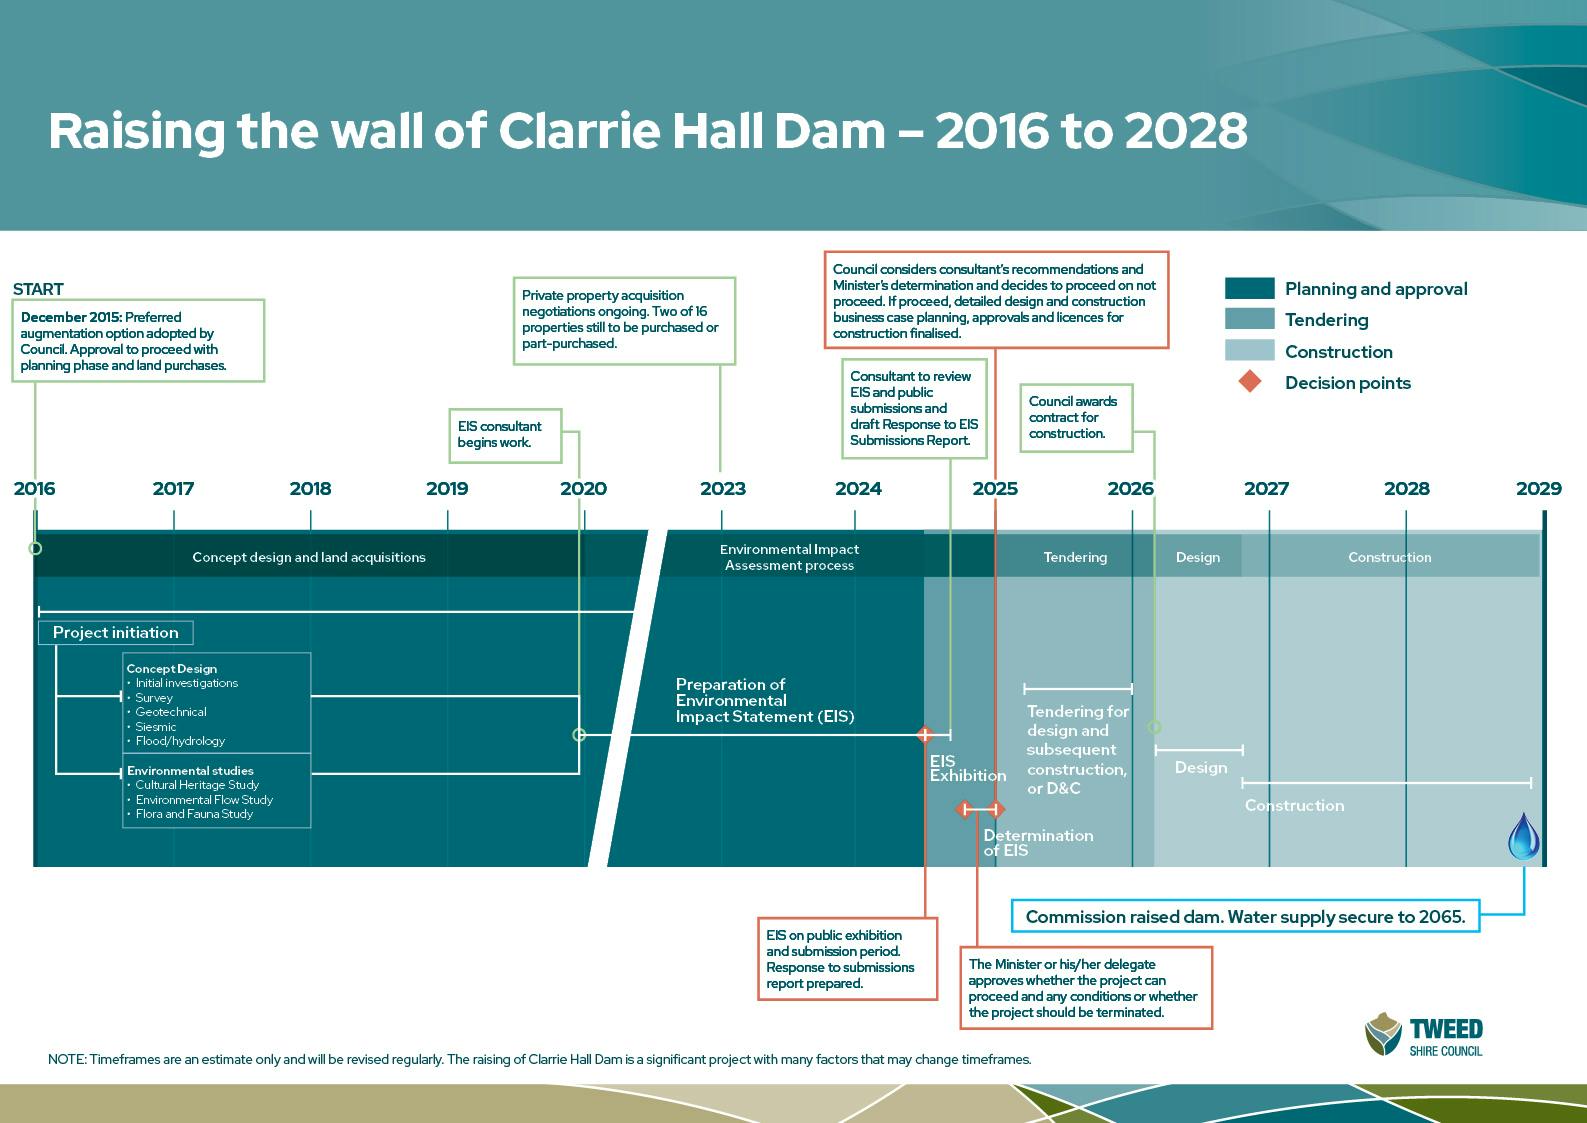 Raising Clarrie Hall Dam - project timeline